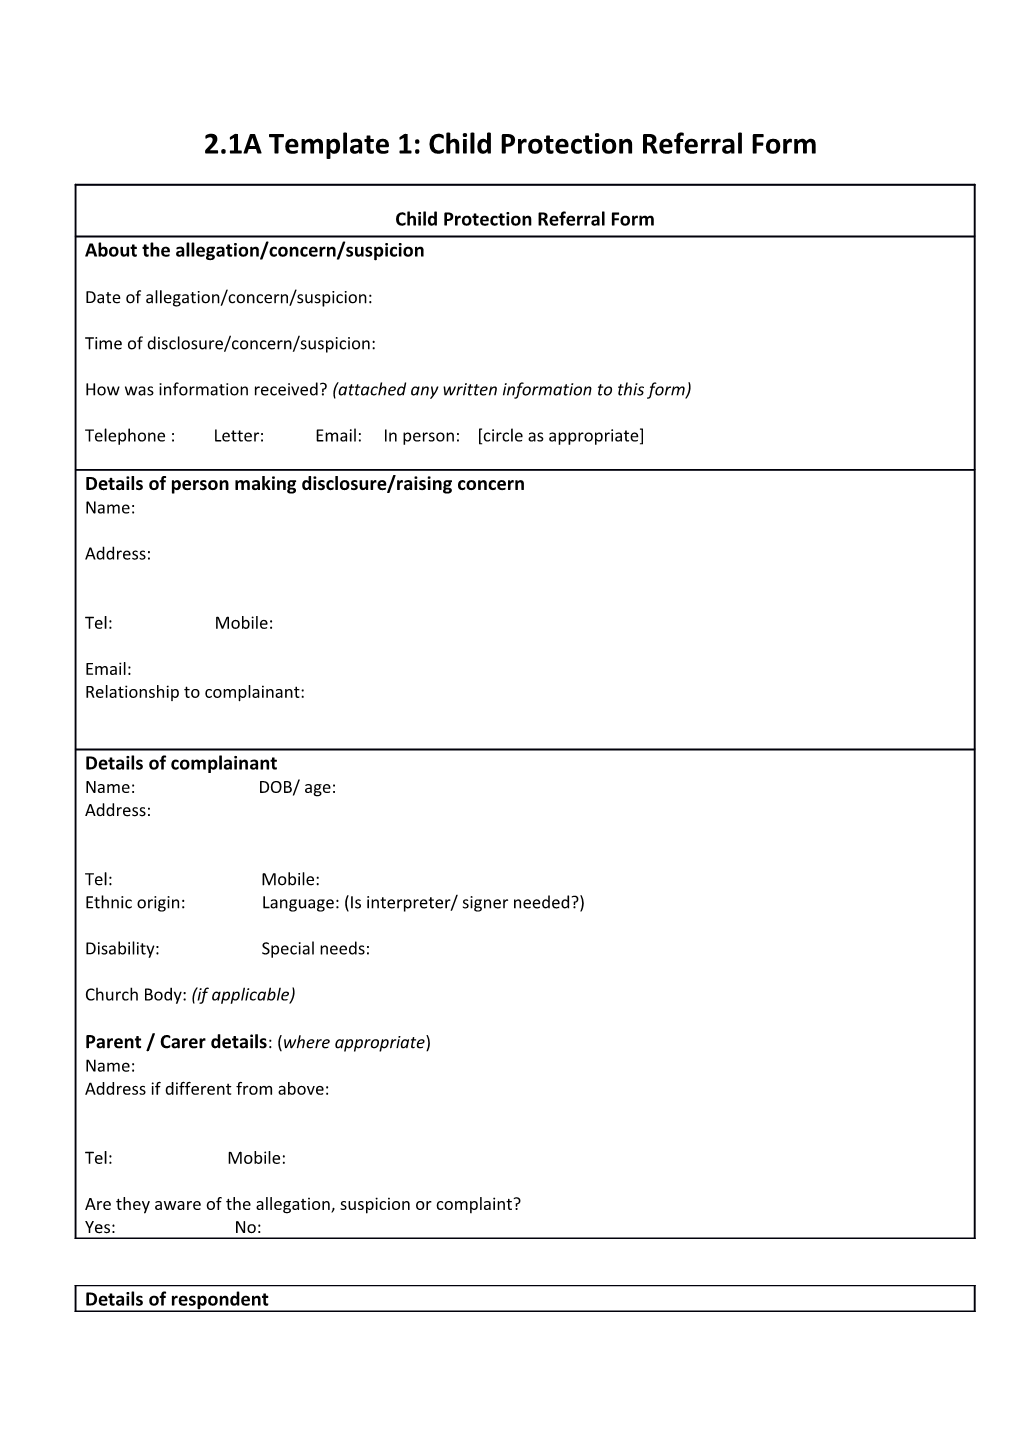 2.1A Template 1: Child Protection Referral Form